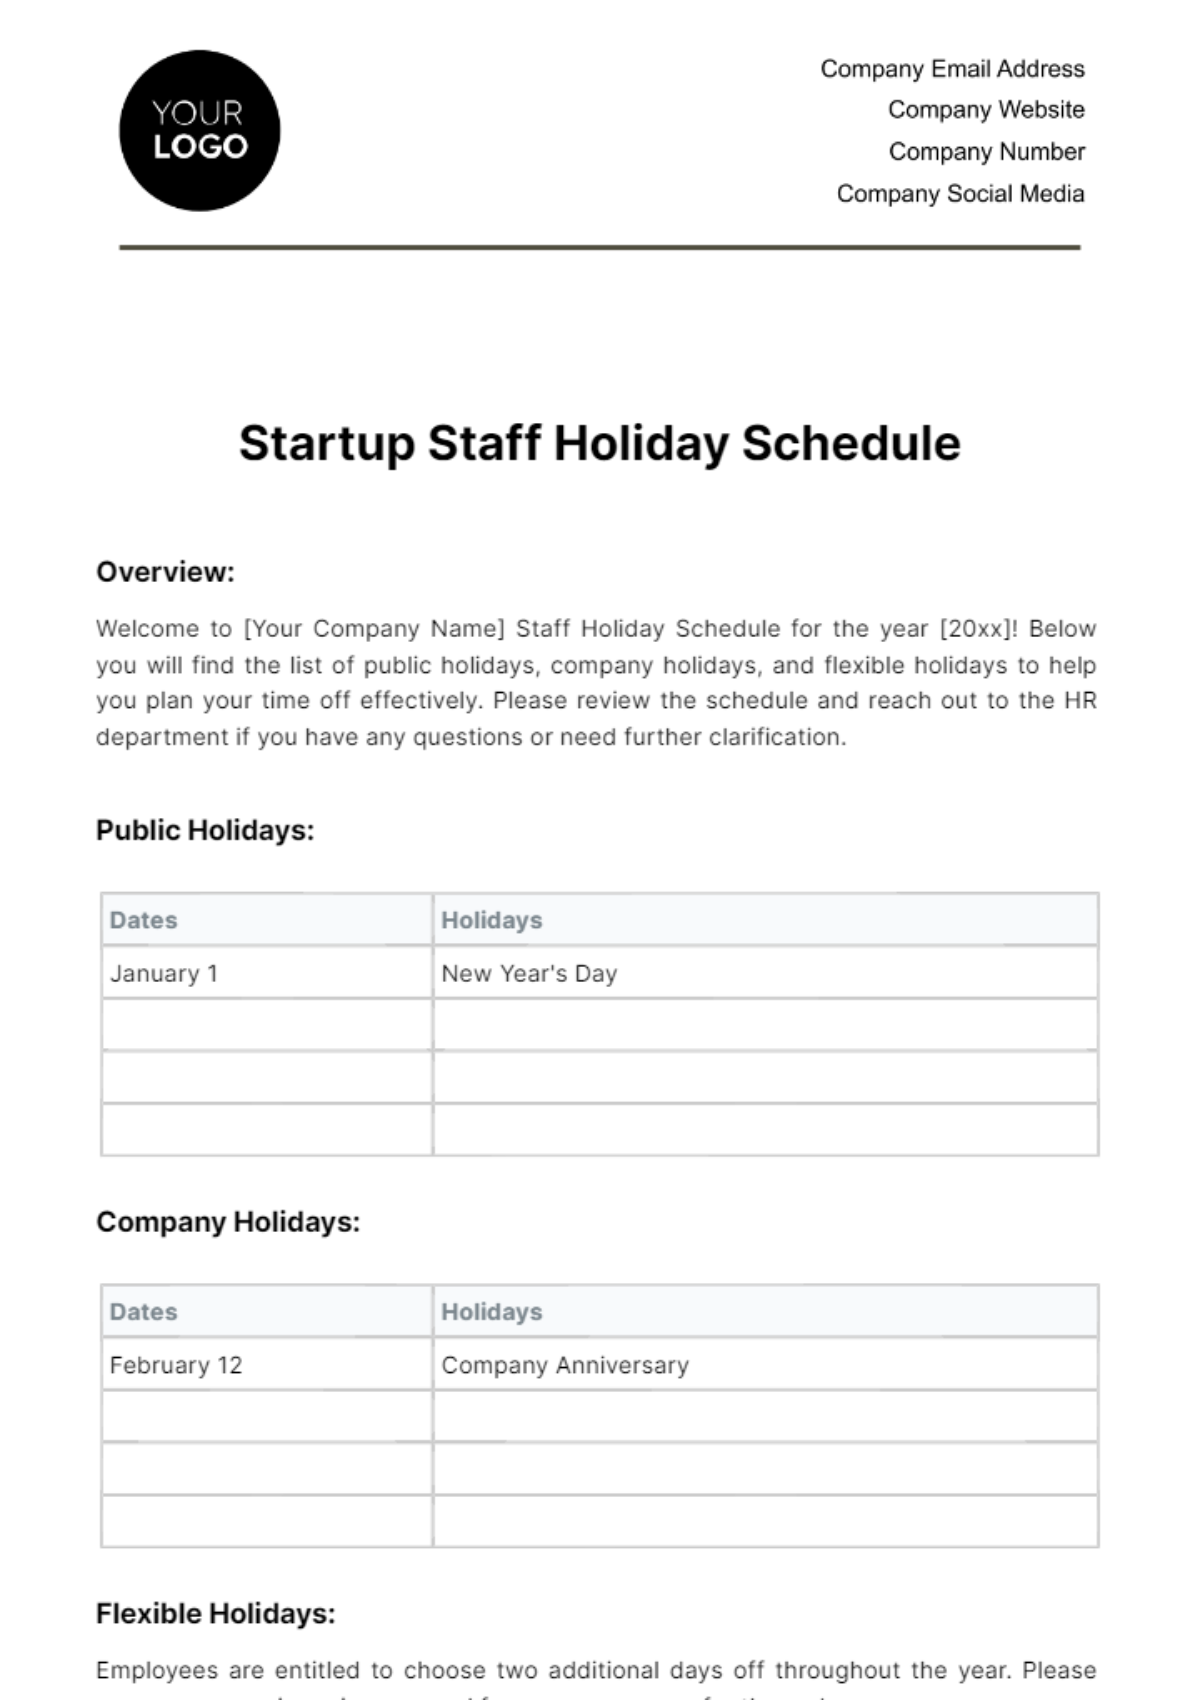 Startup Staff Holiday Schedule Template